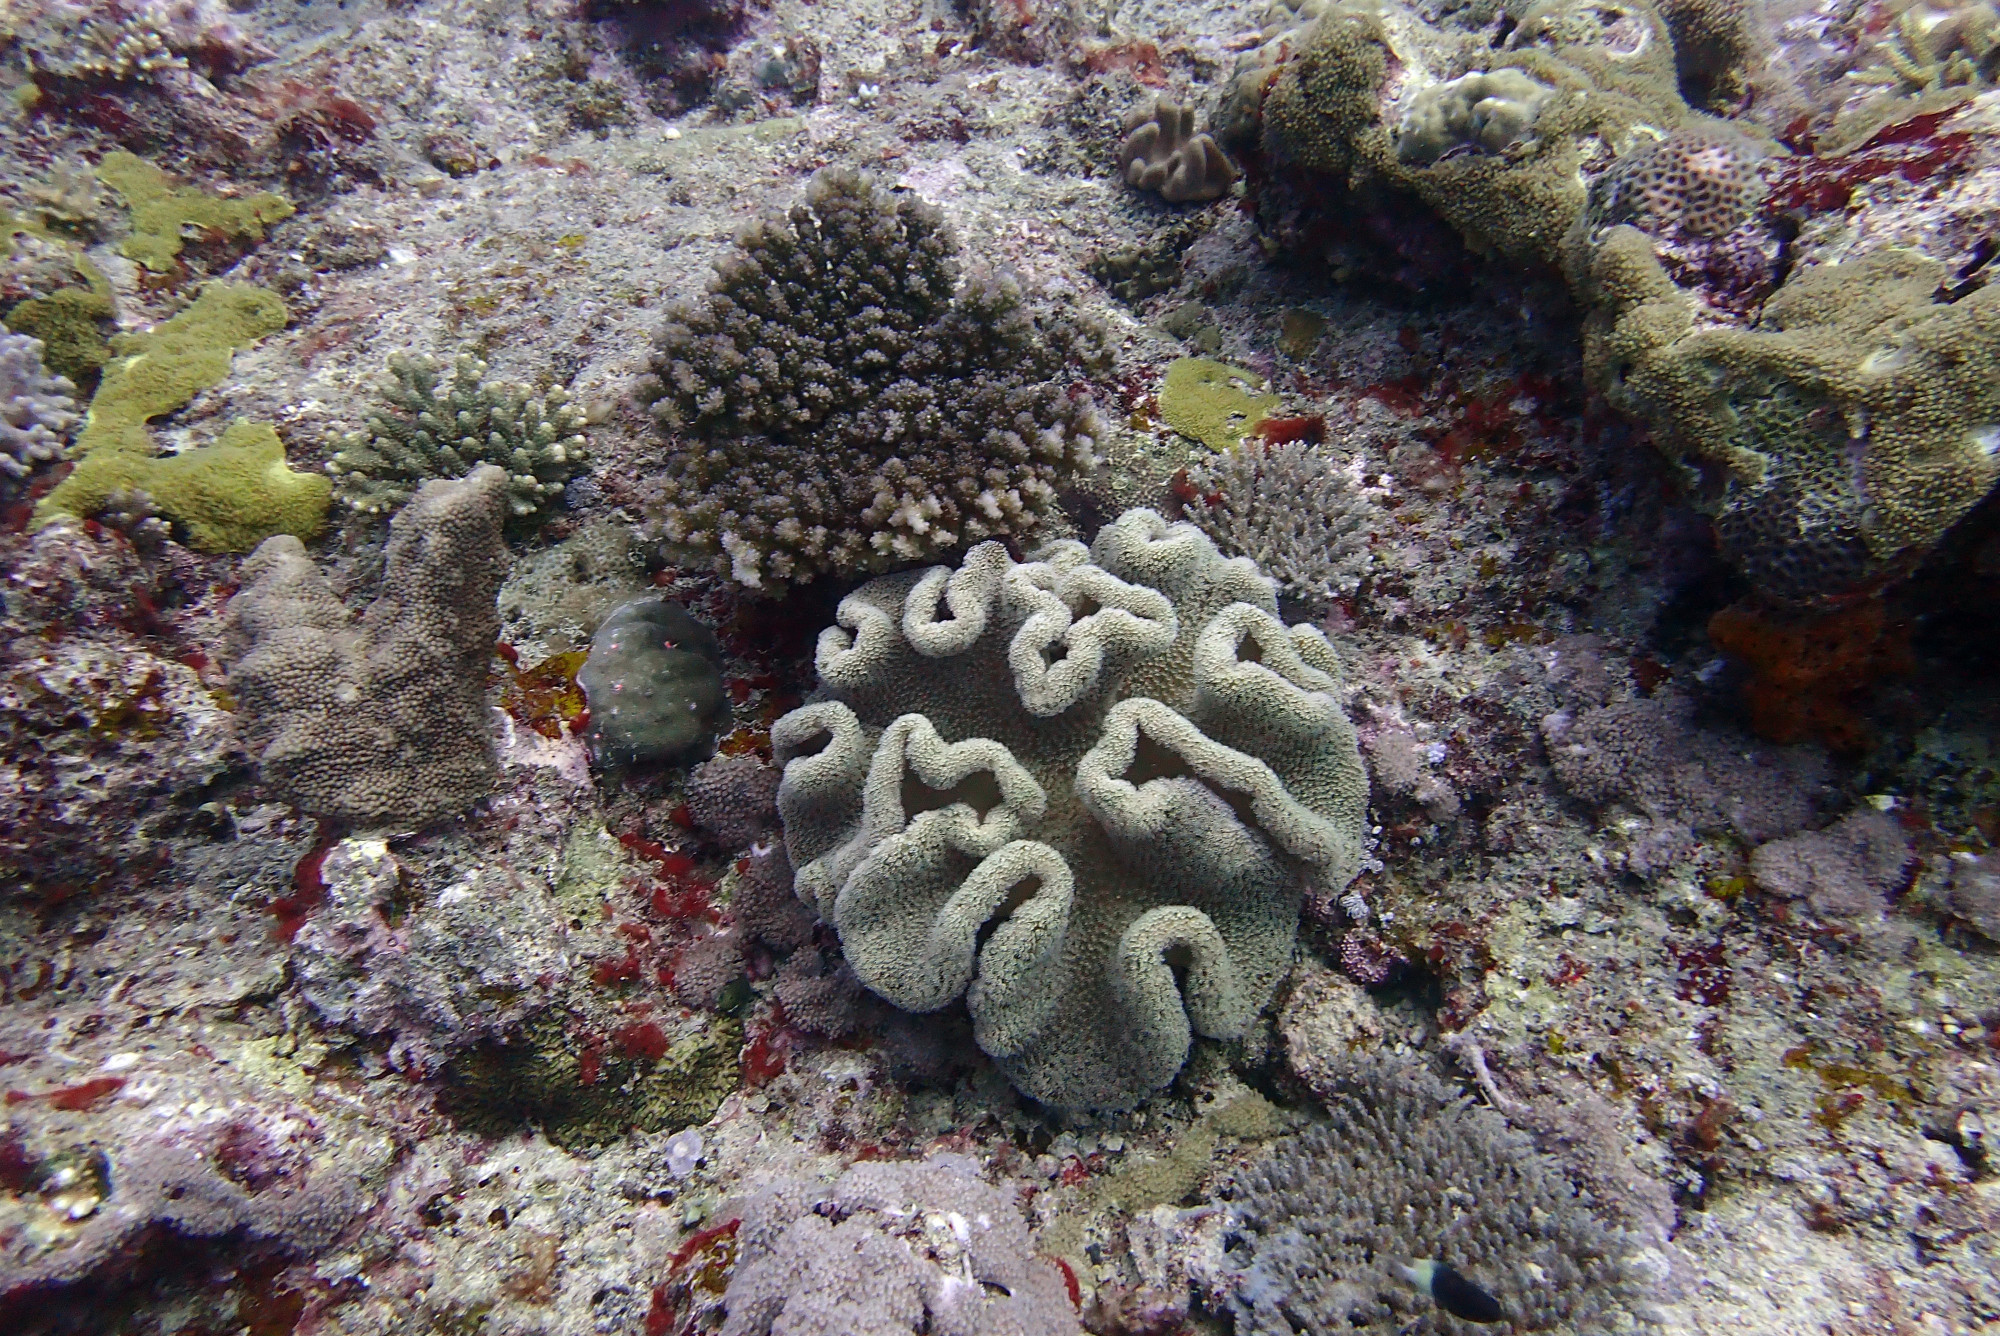 Corals<br/>
Tombant l' Almimady